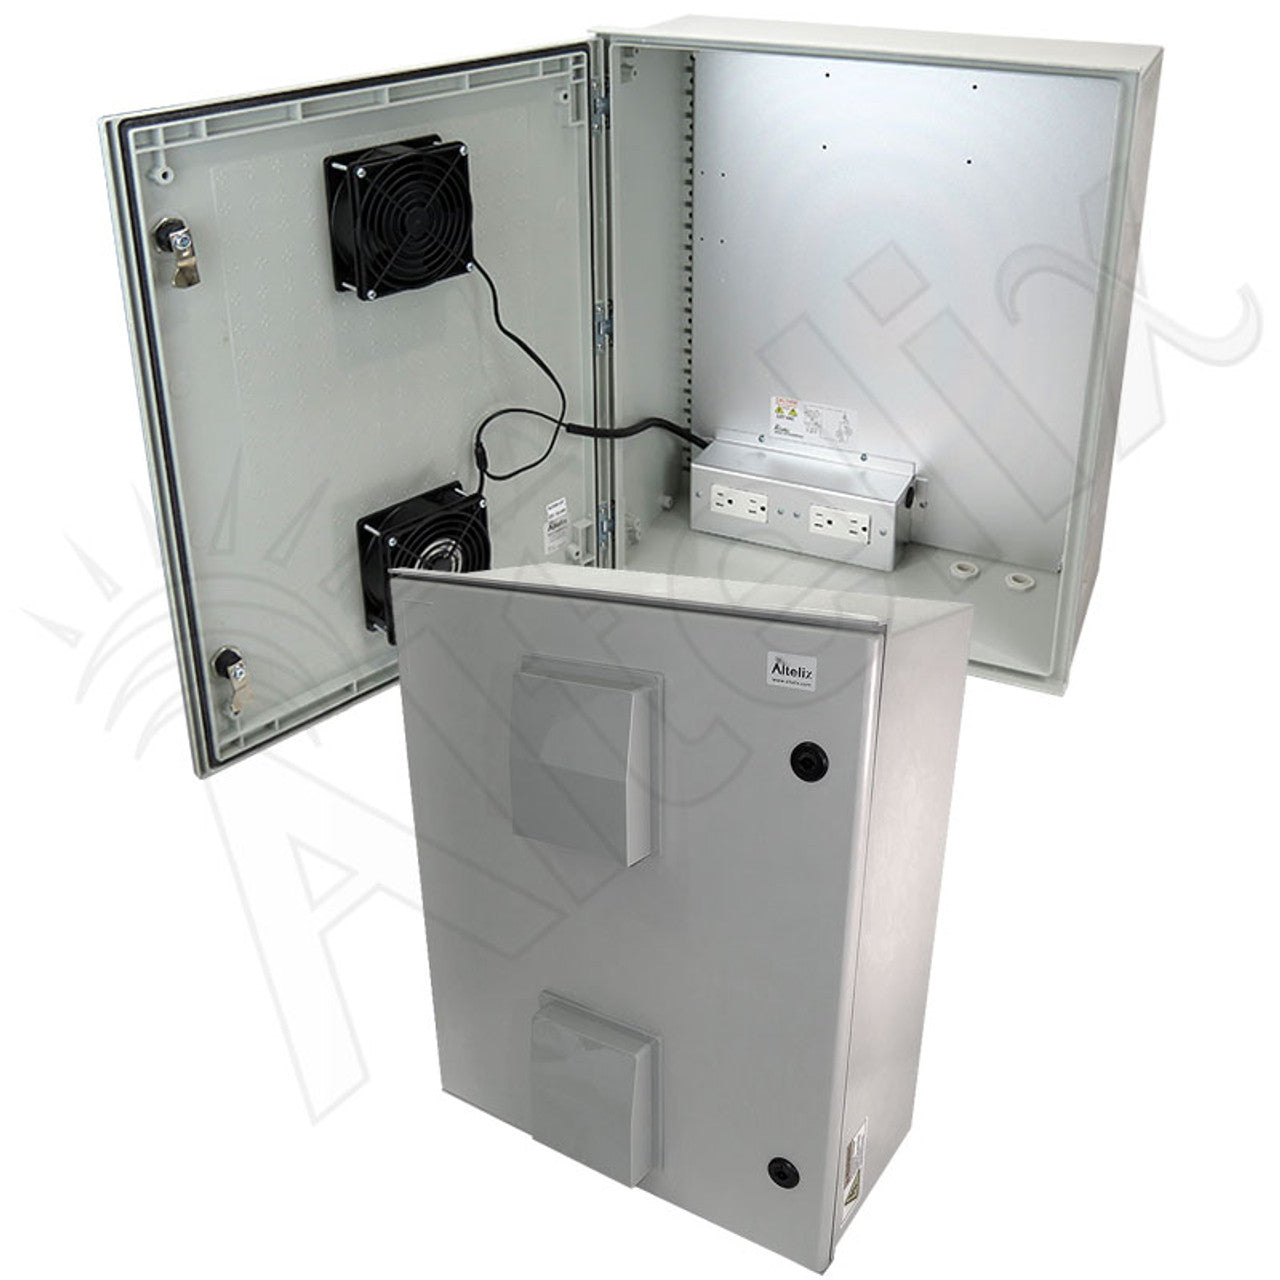 Altelix Vented Fiberglass Weatherproof NEMA Enclosure with Cooling Fan, 200W Heater and 120 VAC Outlets-7